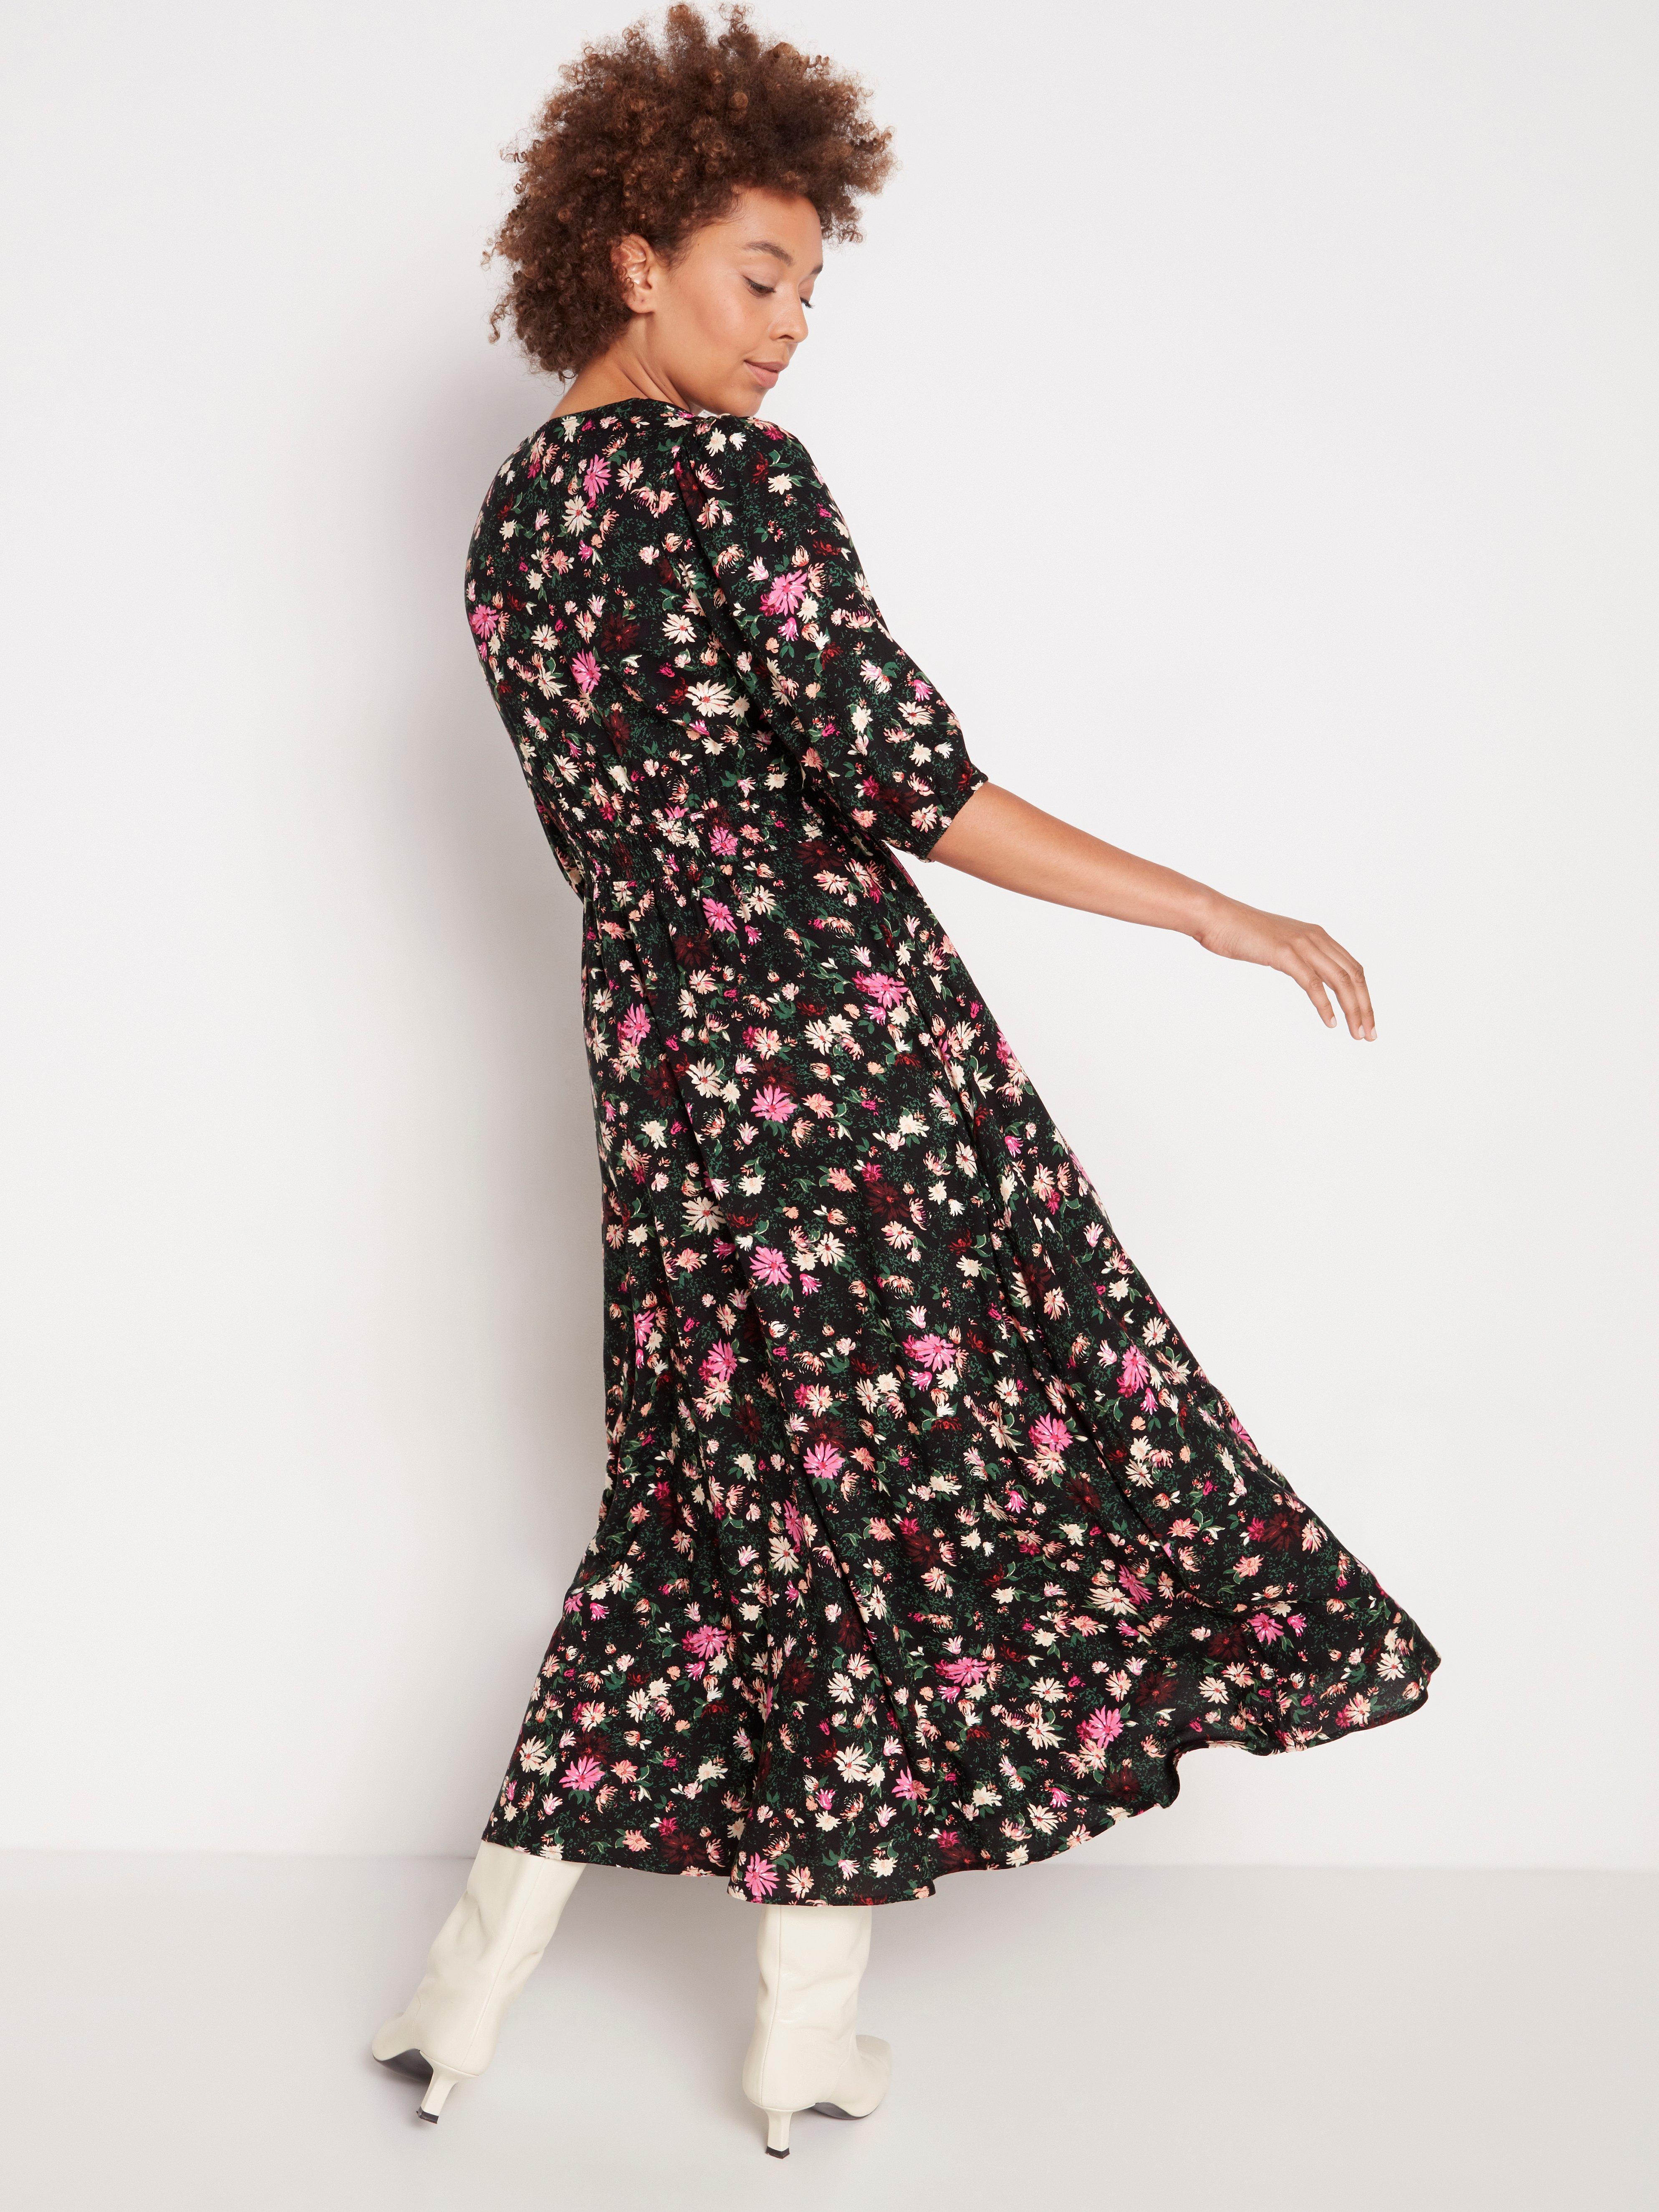 black floral maxi dress with sleeves